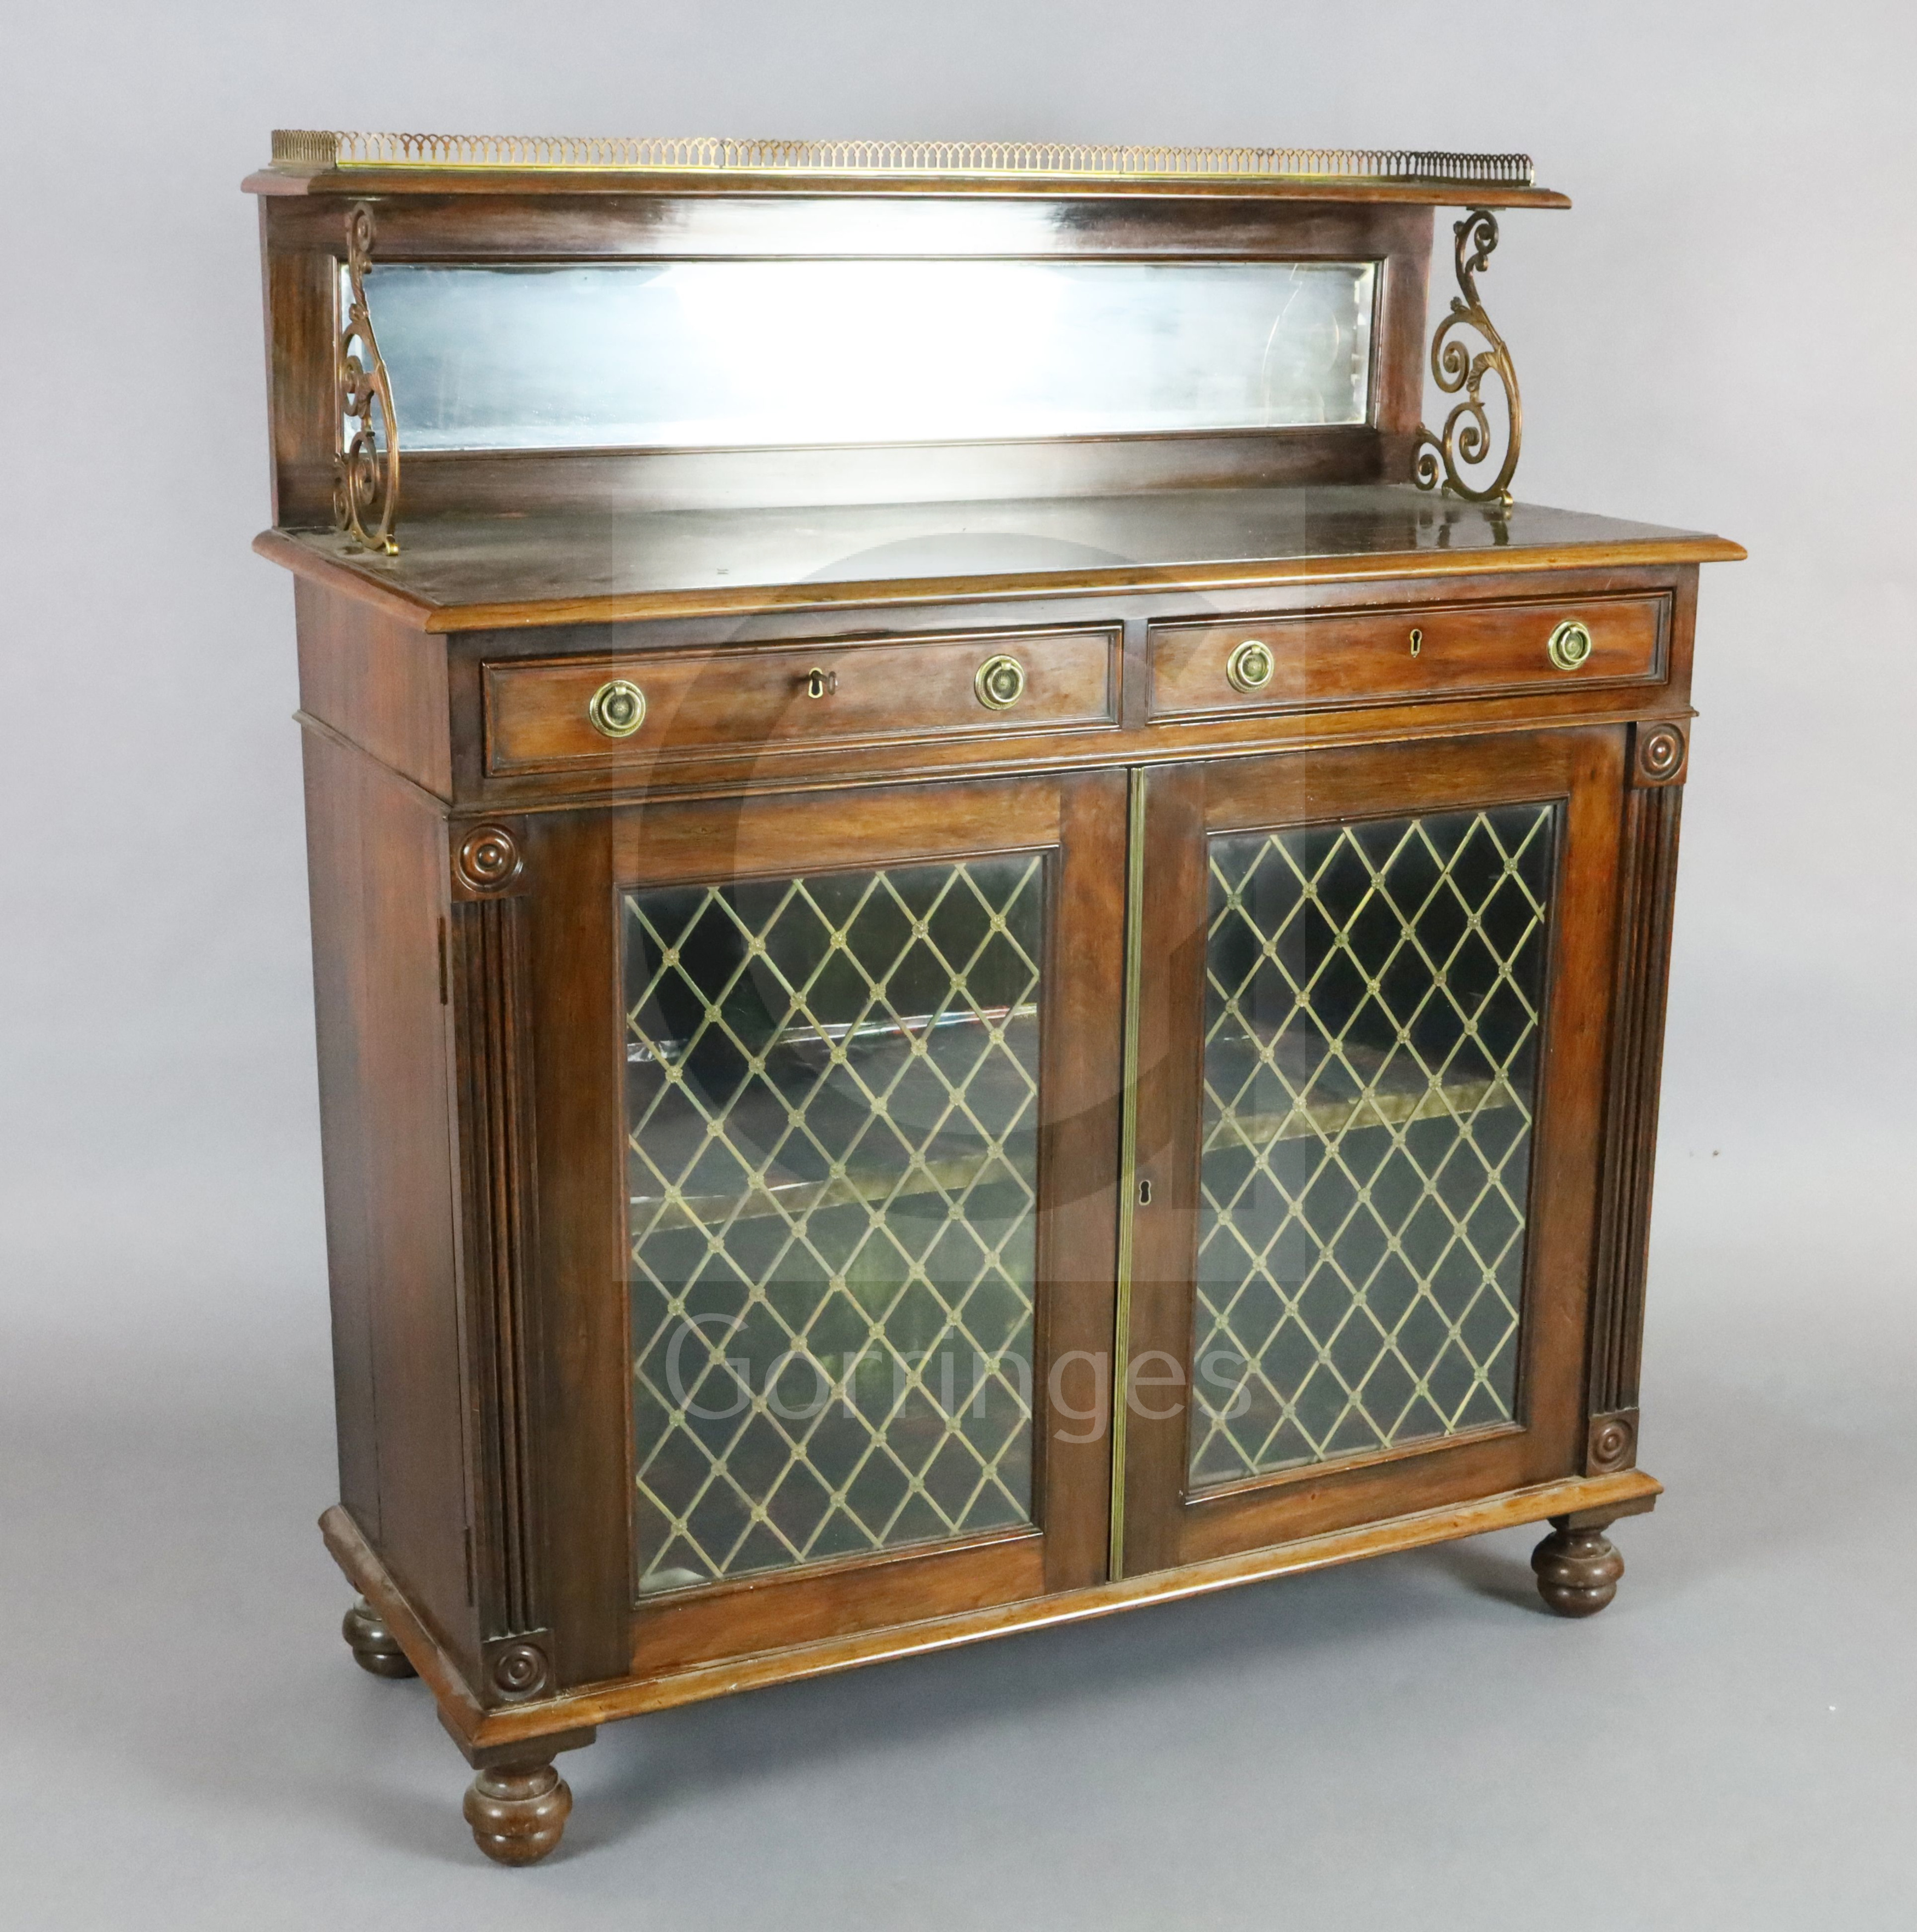 A William IV brass mounted rosewood chiffonier, with three quarter gallery, mirrored back, two